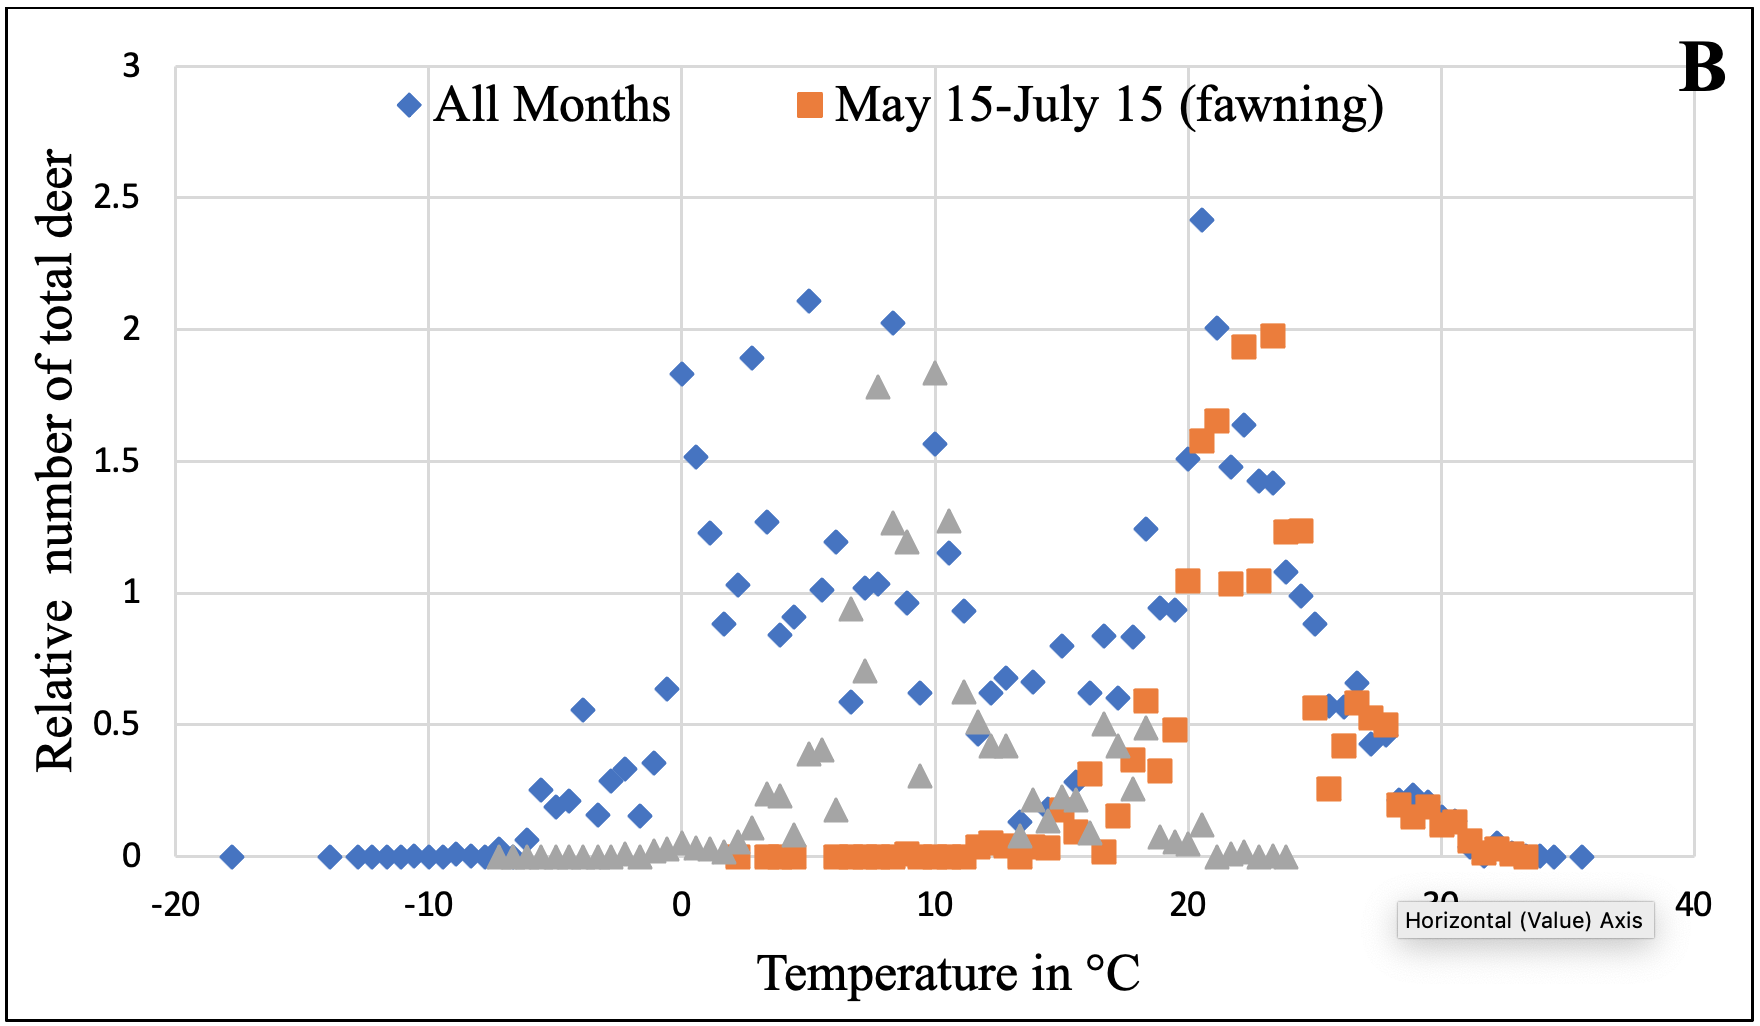 All temperature data and the data from May 15 – July 15, fawning time, and October - November, which is the time of rut. 